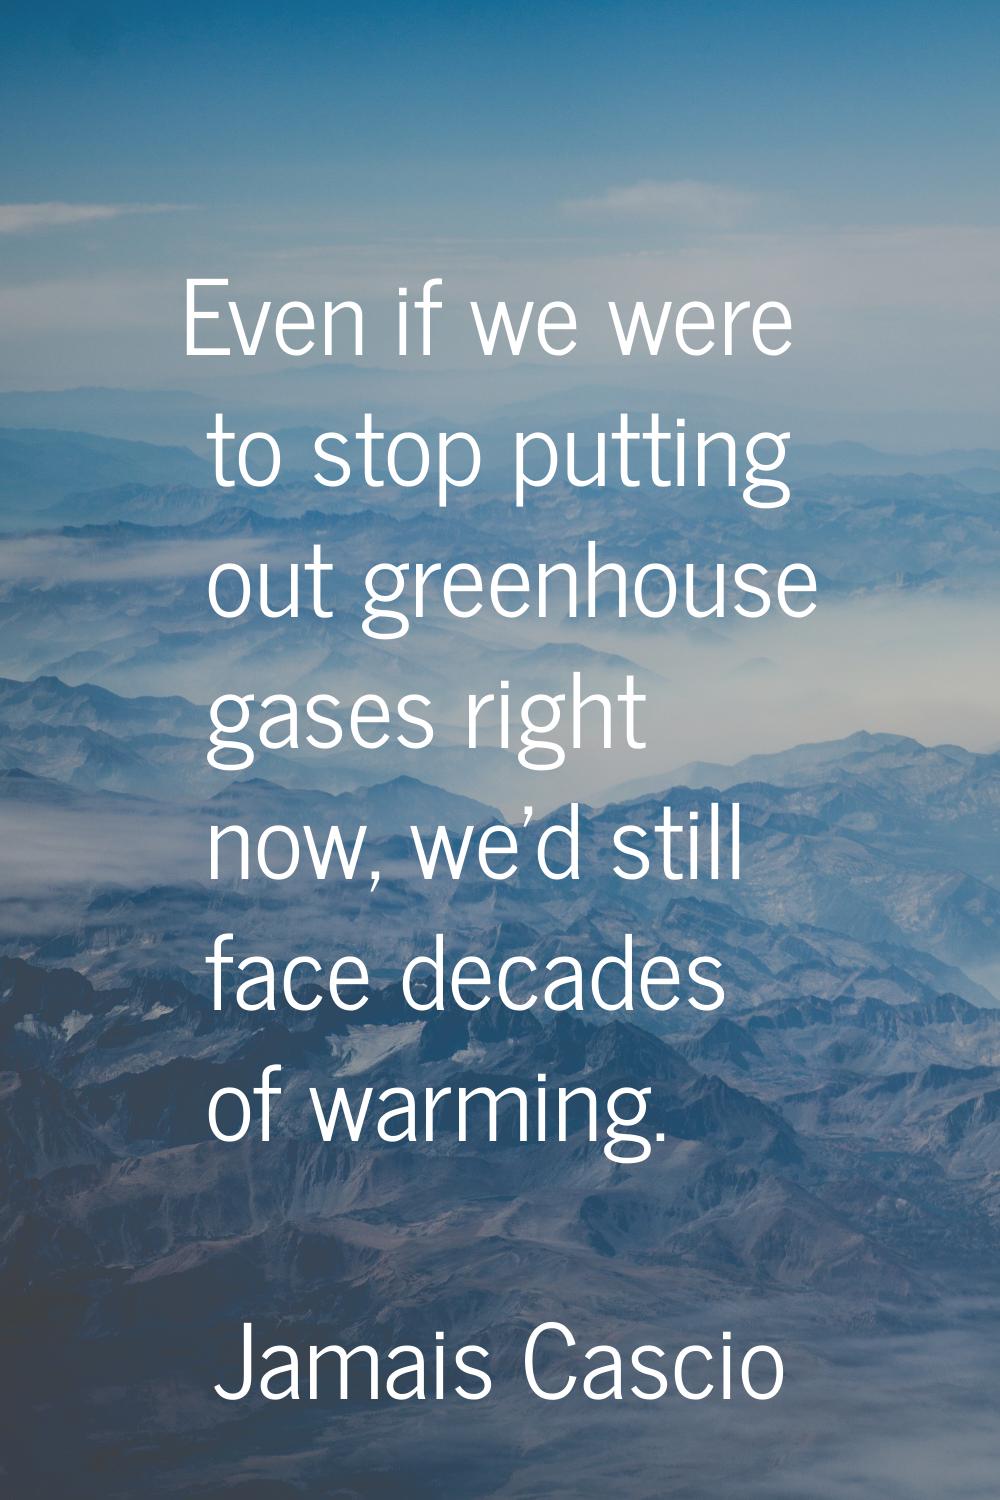 Even if we were to stop putting out greenhouse gases right now, we'd still face decades of warming.